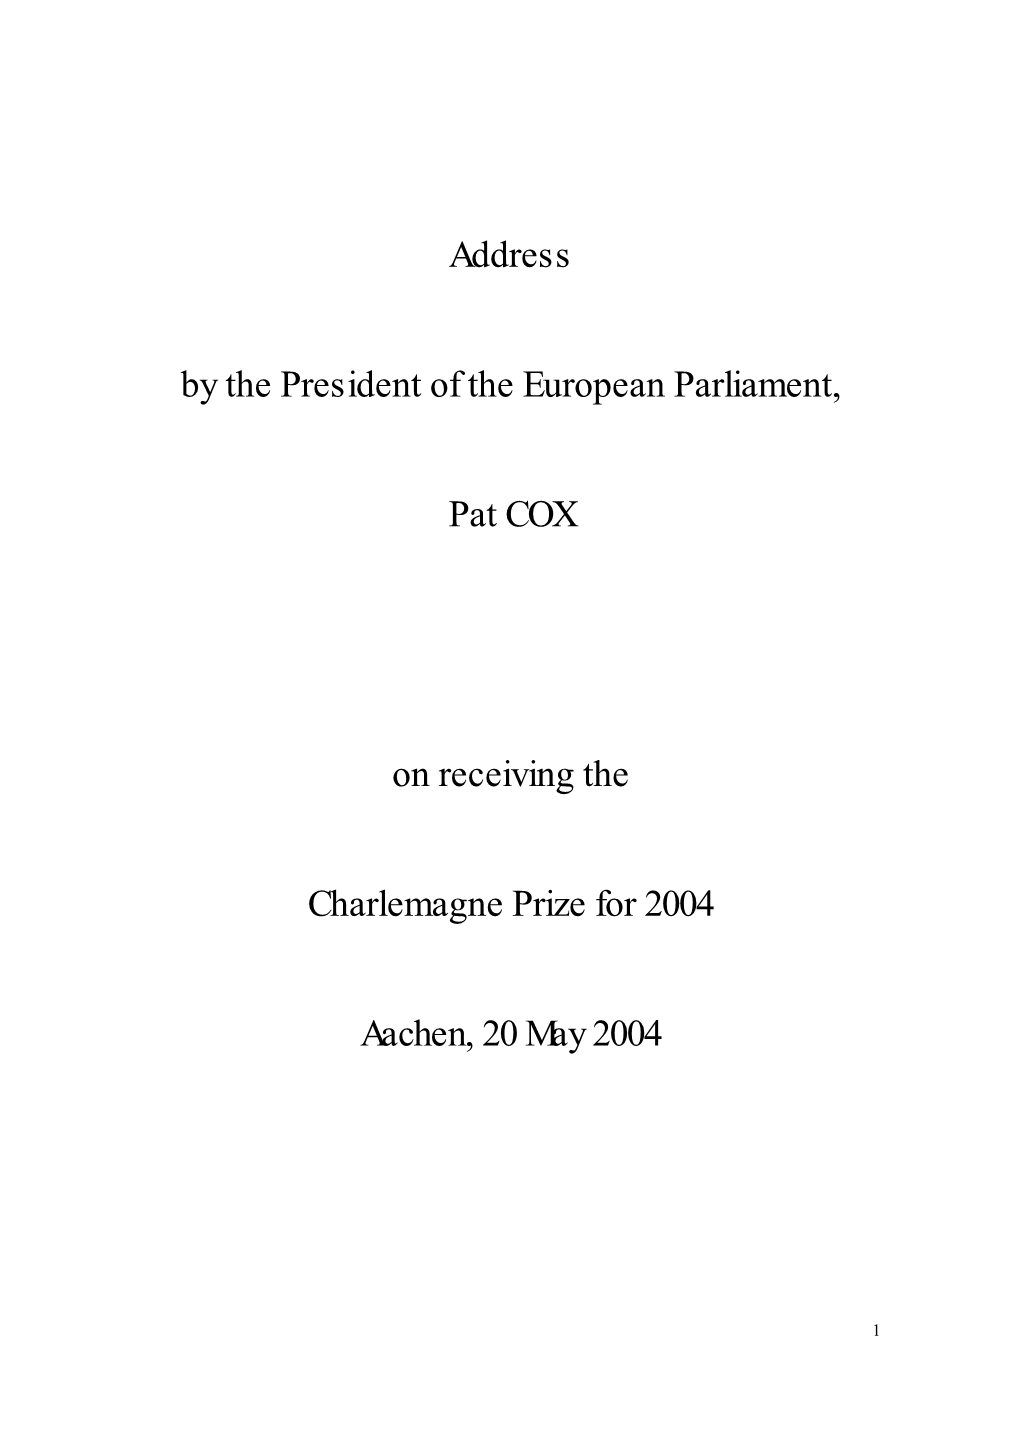 Adress by the President of the European Parliament, Pat Cox